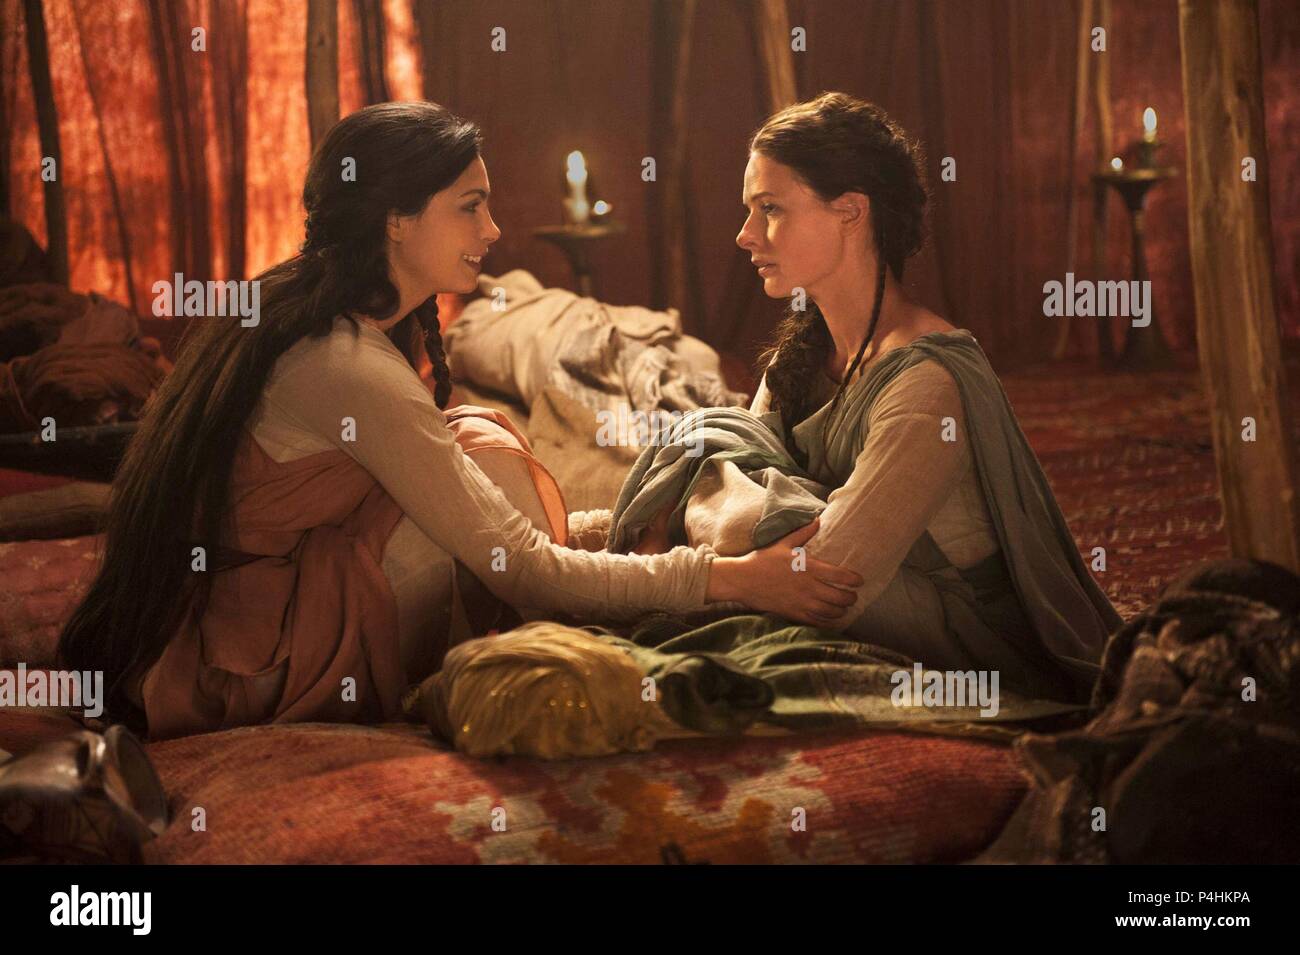 Original Film Title: THE RED TENT. English Title: THE RED TENT. Film  Director: ROGER YOUNG. Year: 2014. Stars: MORENA BACCARIN; REBECCA  FERGUSON. Credit: Sony Pictures Television / Album Stock Photo - Alamy